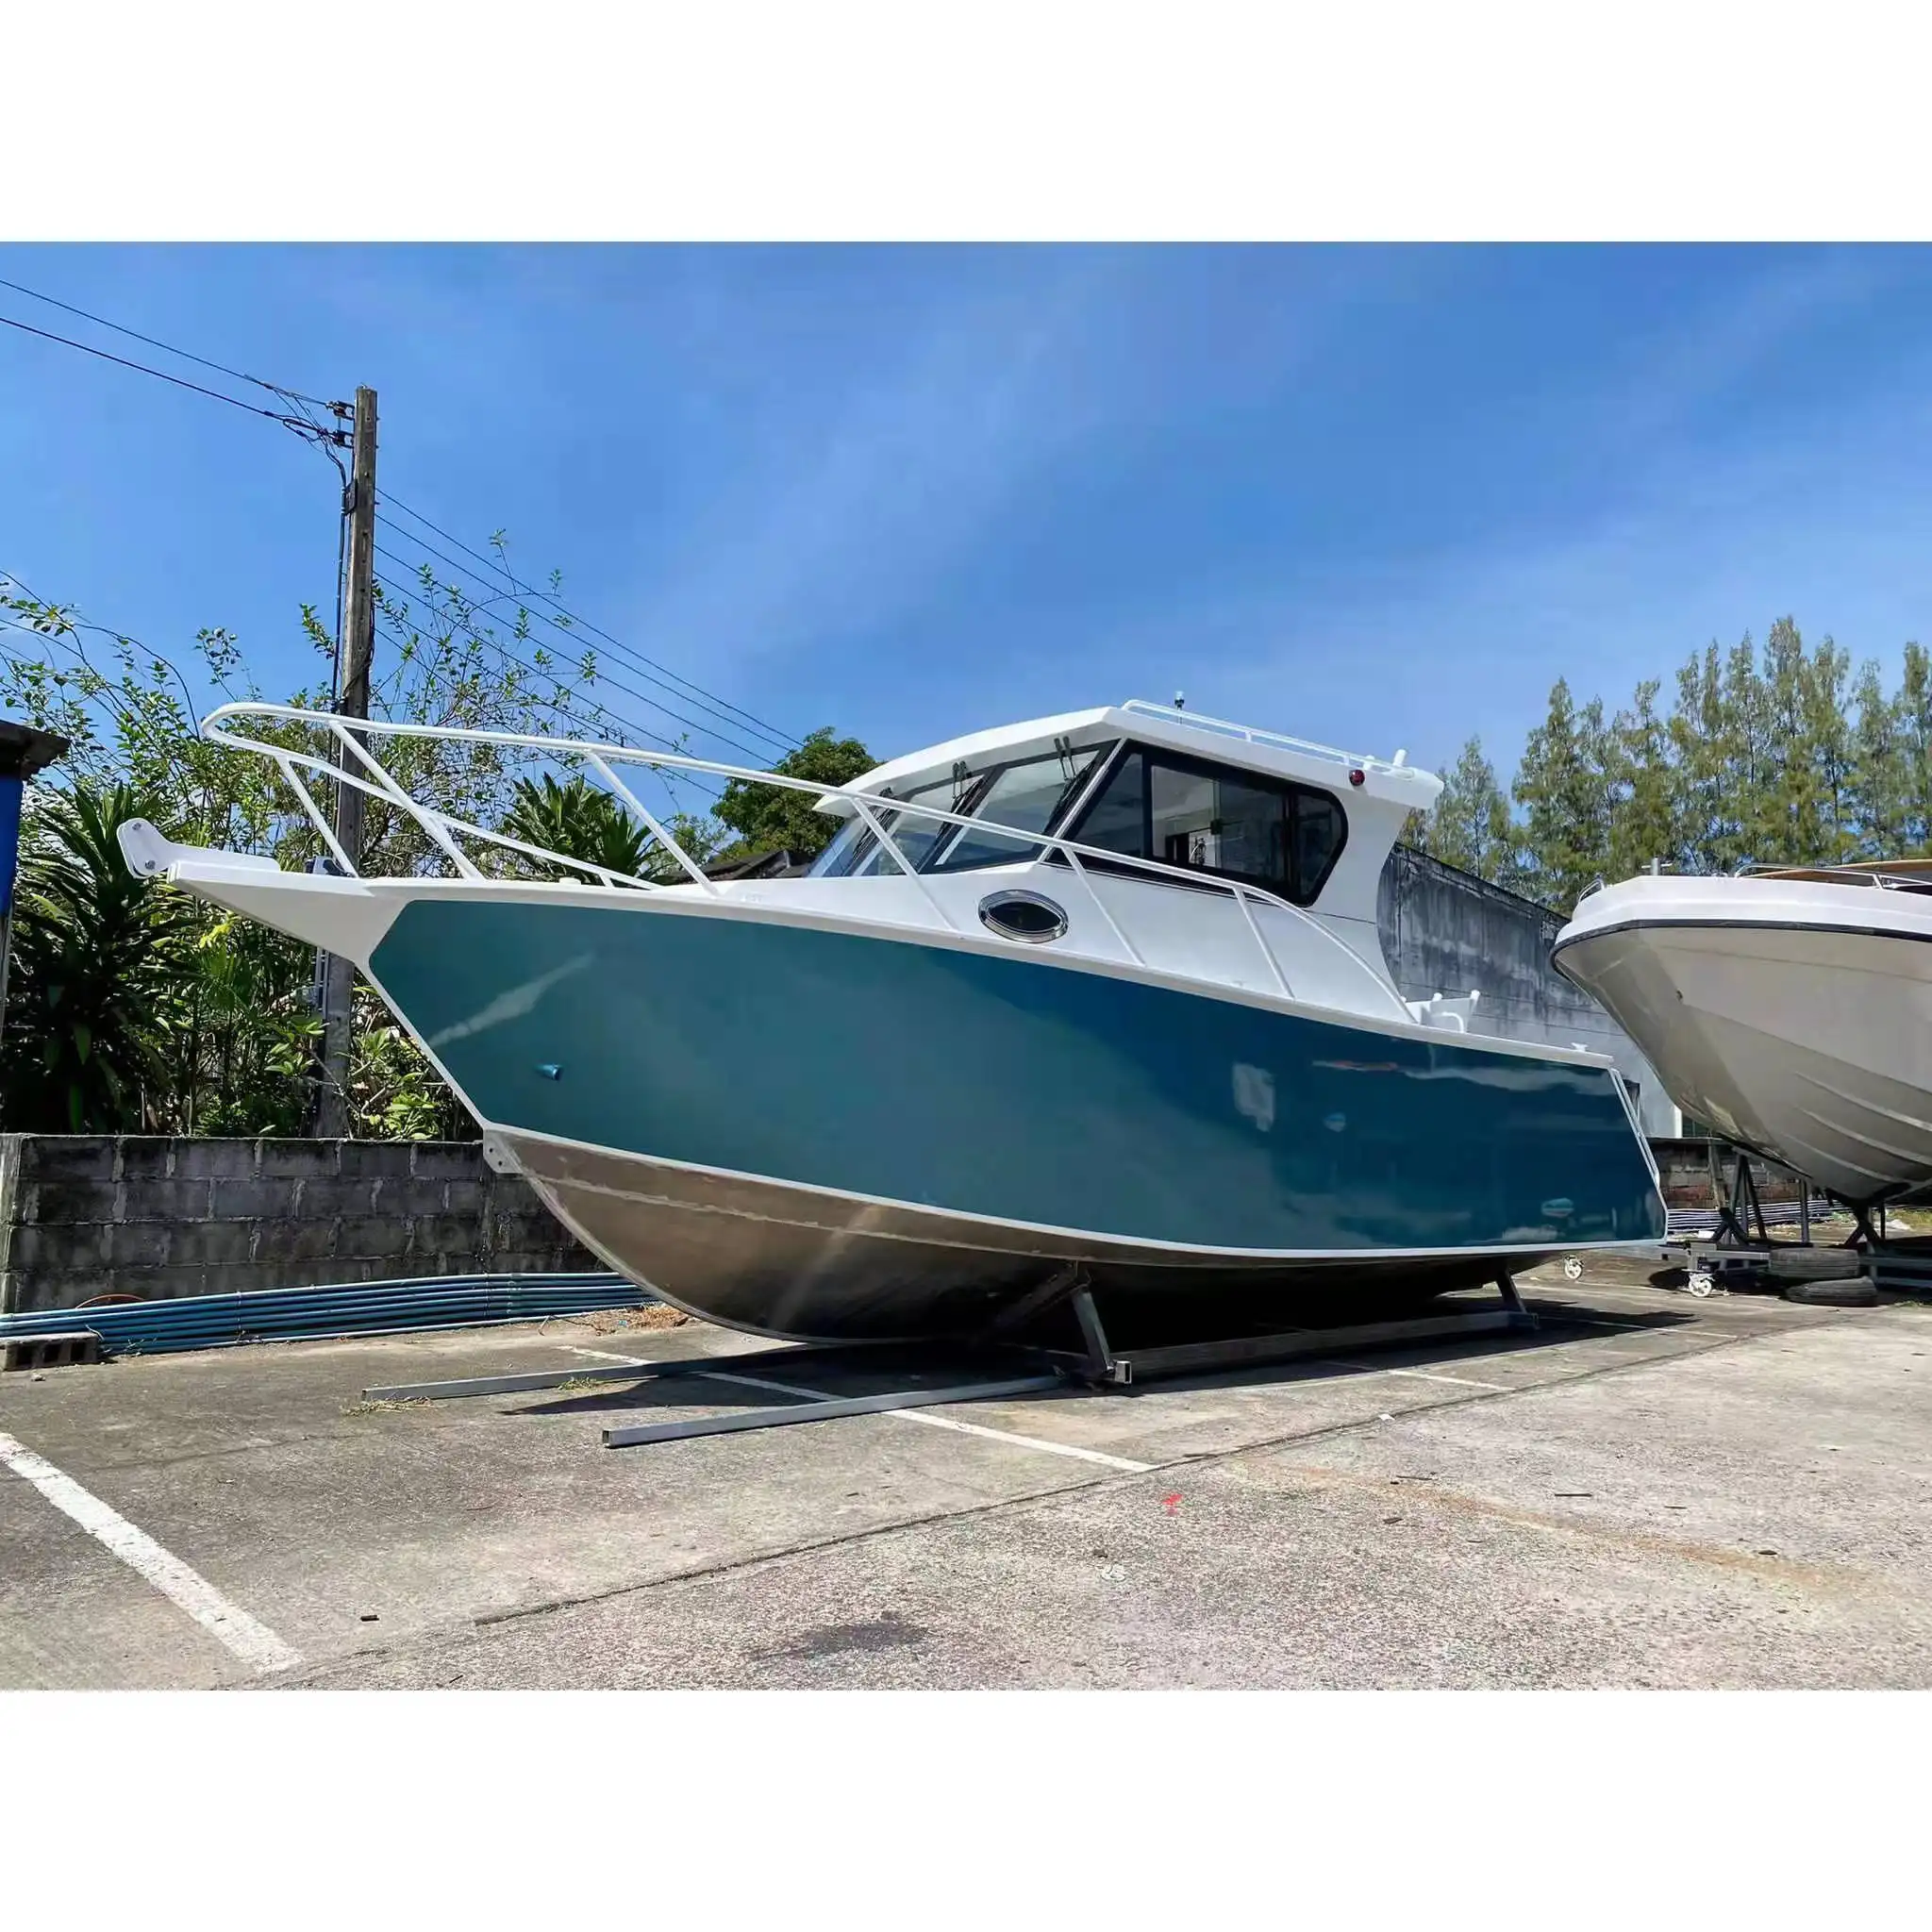 Ocean Alloy Boat 25ft 7.5m Lifestyle yacht luxury Aluminum Fishing Boat cabin cruiser for Sale Thailand with kitchen & Handbasin